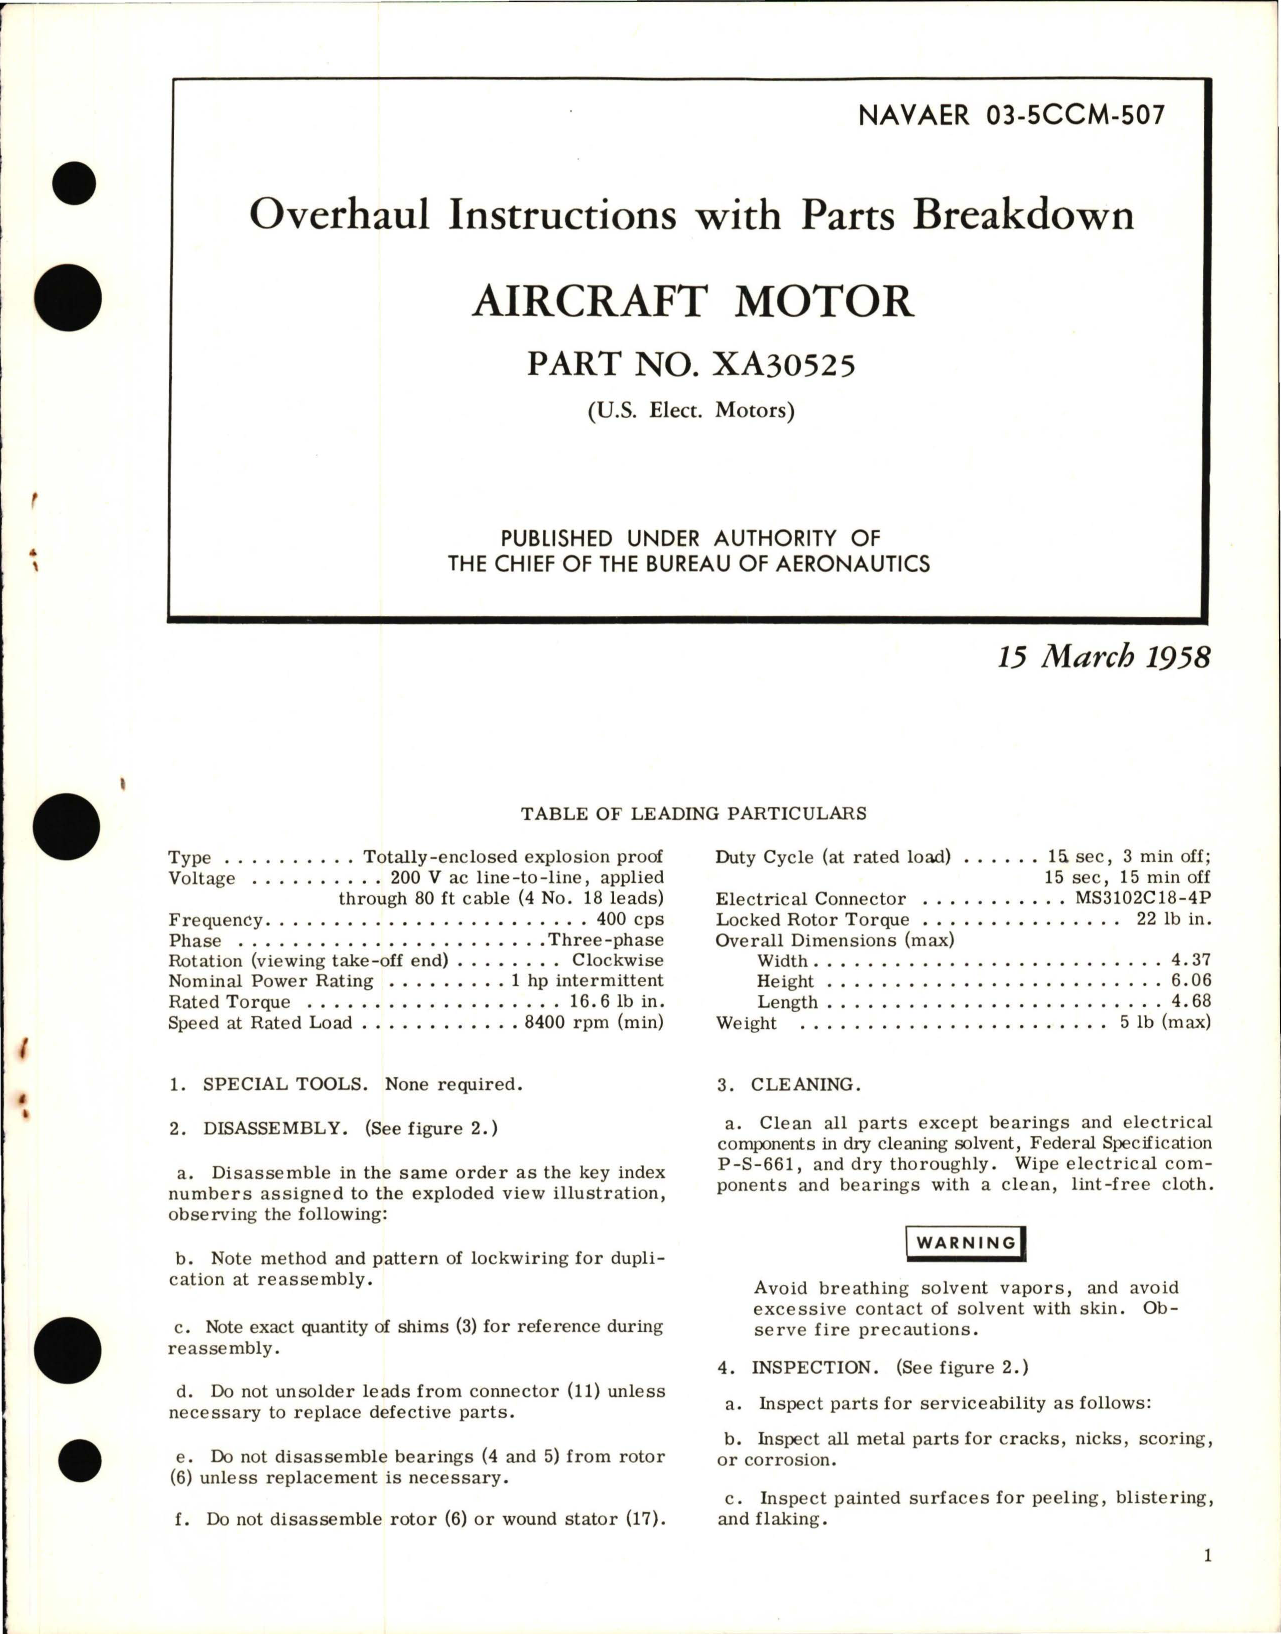 Sample page 1 from AirCorps Library document: Overhaul Instructions with Parts Breakdown for Aircraft Motor - Part XA30525